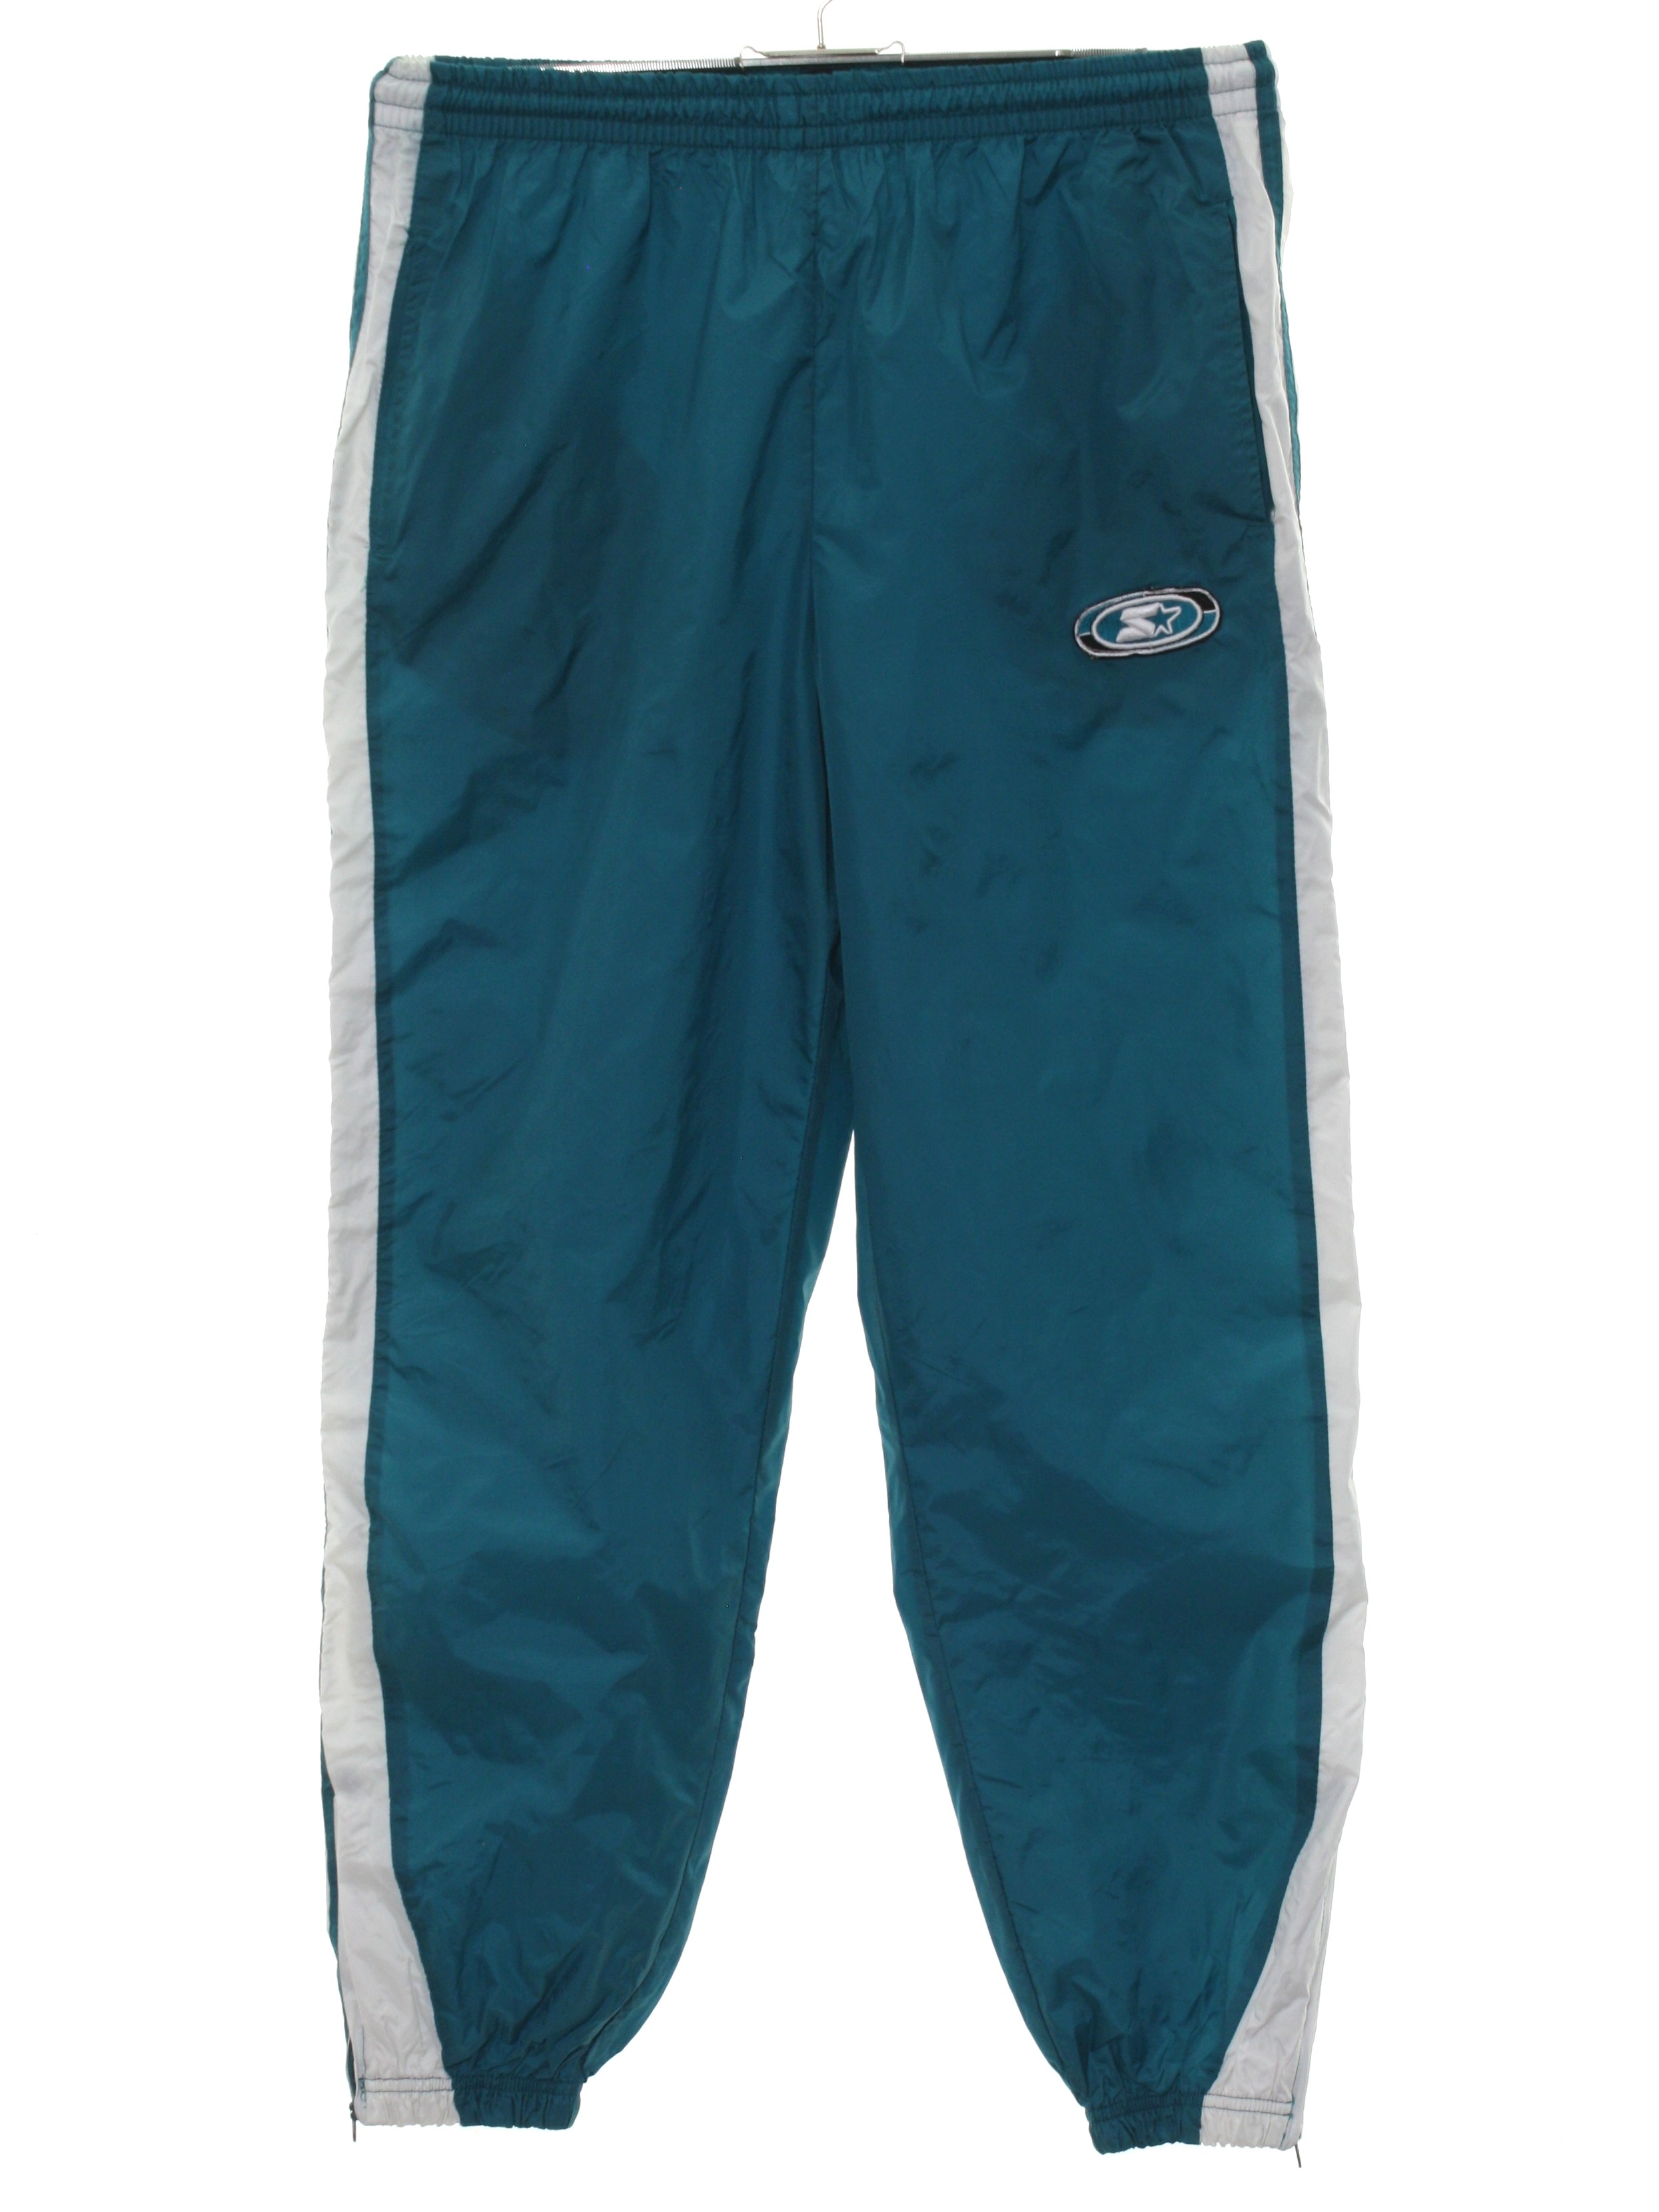 80s Retro Pants: 80s -Starter- Womens teal solid colored nylon shell ...